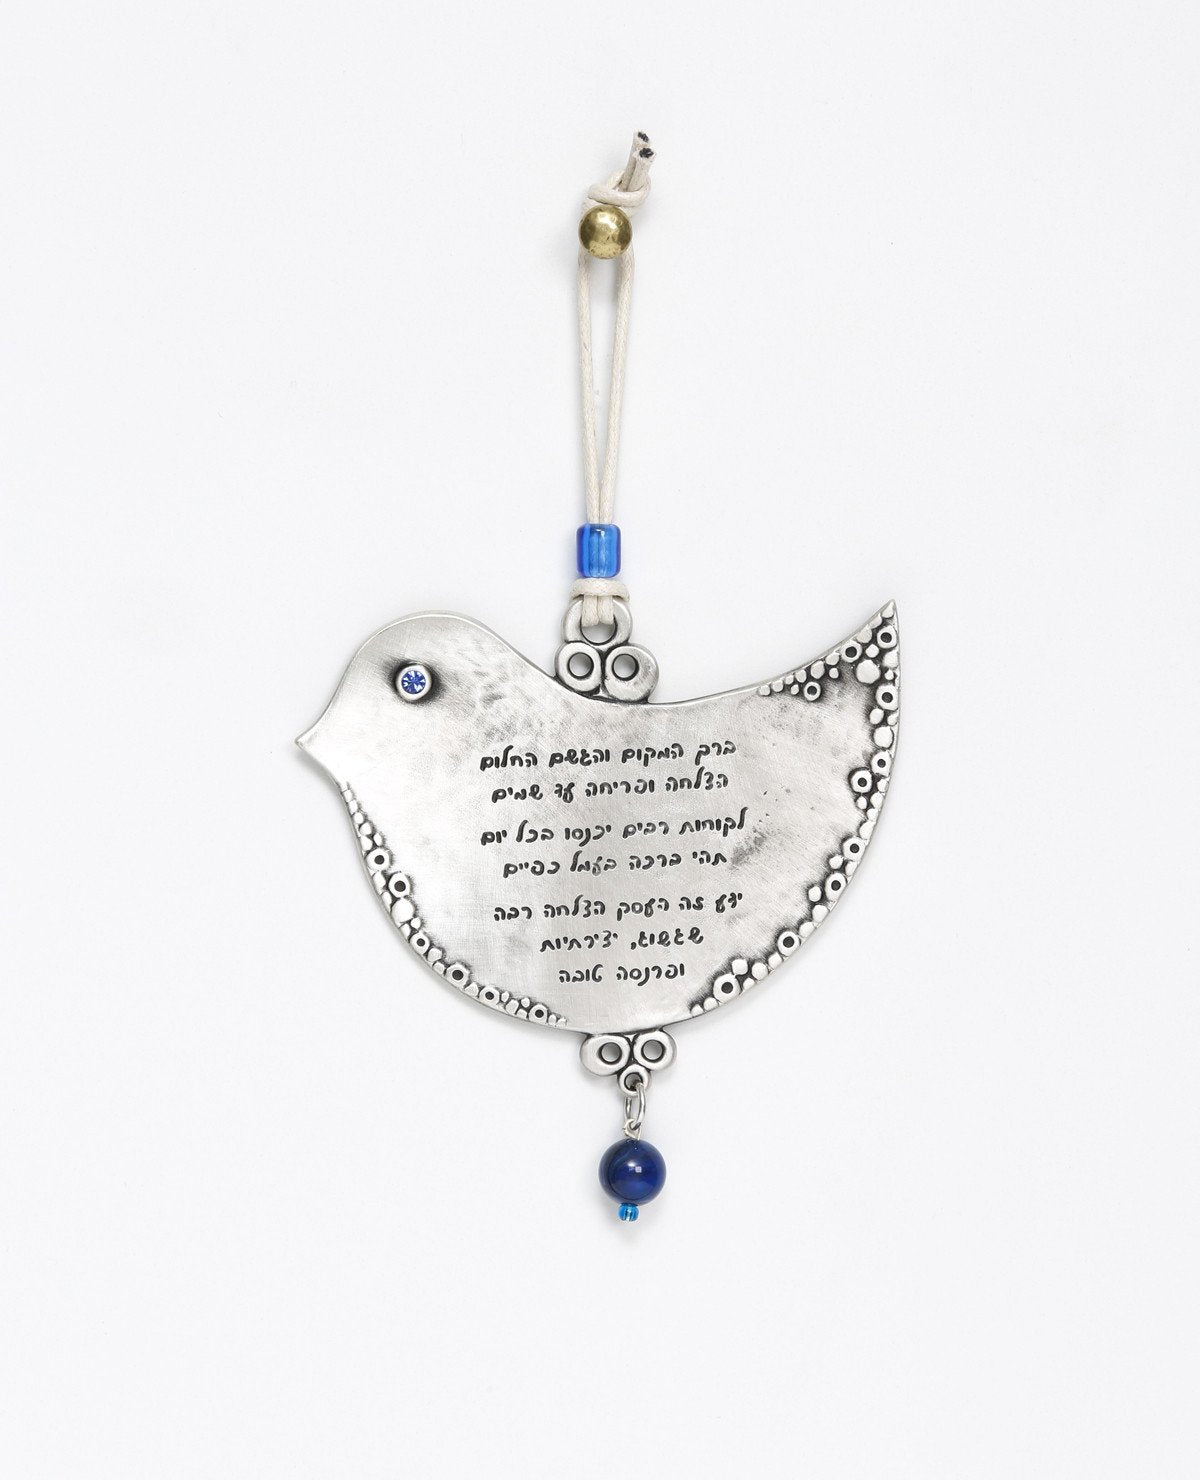 A dove shaped wall ornament with a business blessing in both English and Hebrew. The charming hanger is coated in sterling silver and decorated around the edges with a delicate artistic engravement and embedded with blue Swarovski crystals and blue decorative beads. The exciting blessing words for business success are written in Hebrew on one side and English on the other. Makes the perfect gift to warm up any new or existing place of business, in Israel or abroad, as a heartfelt gesture and a souvenir from